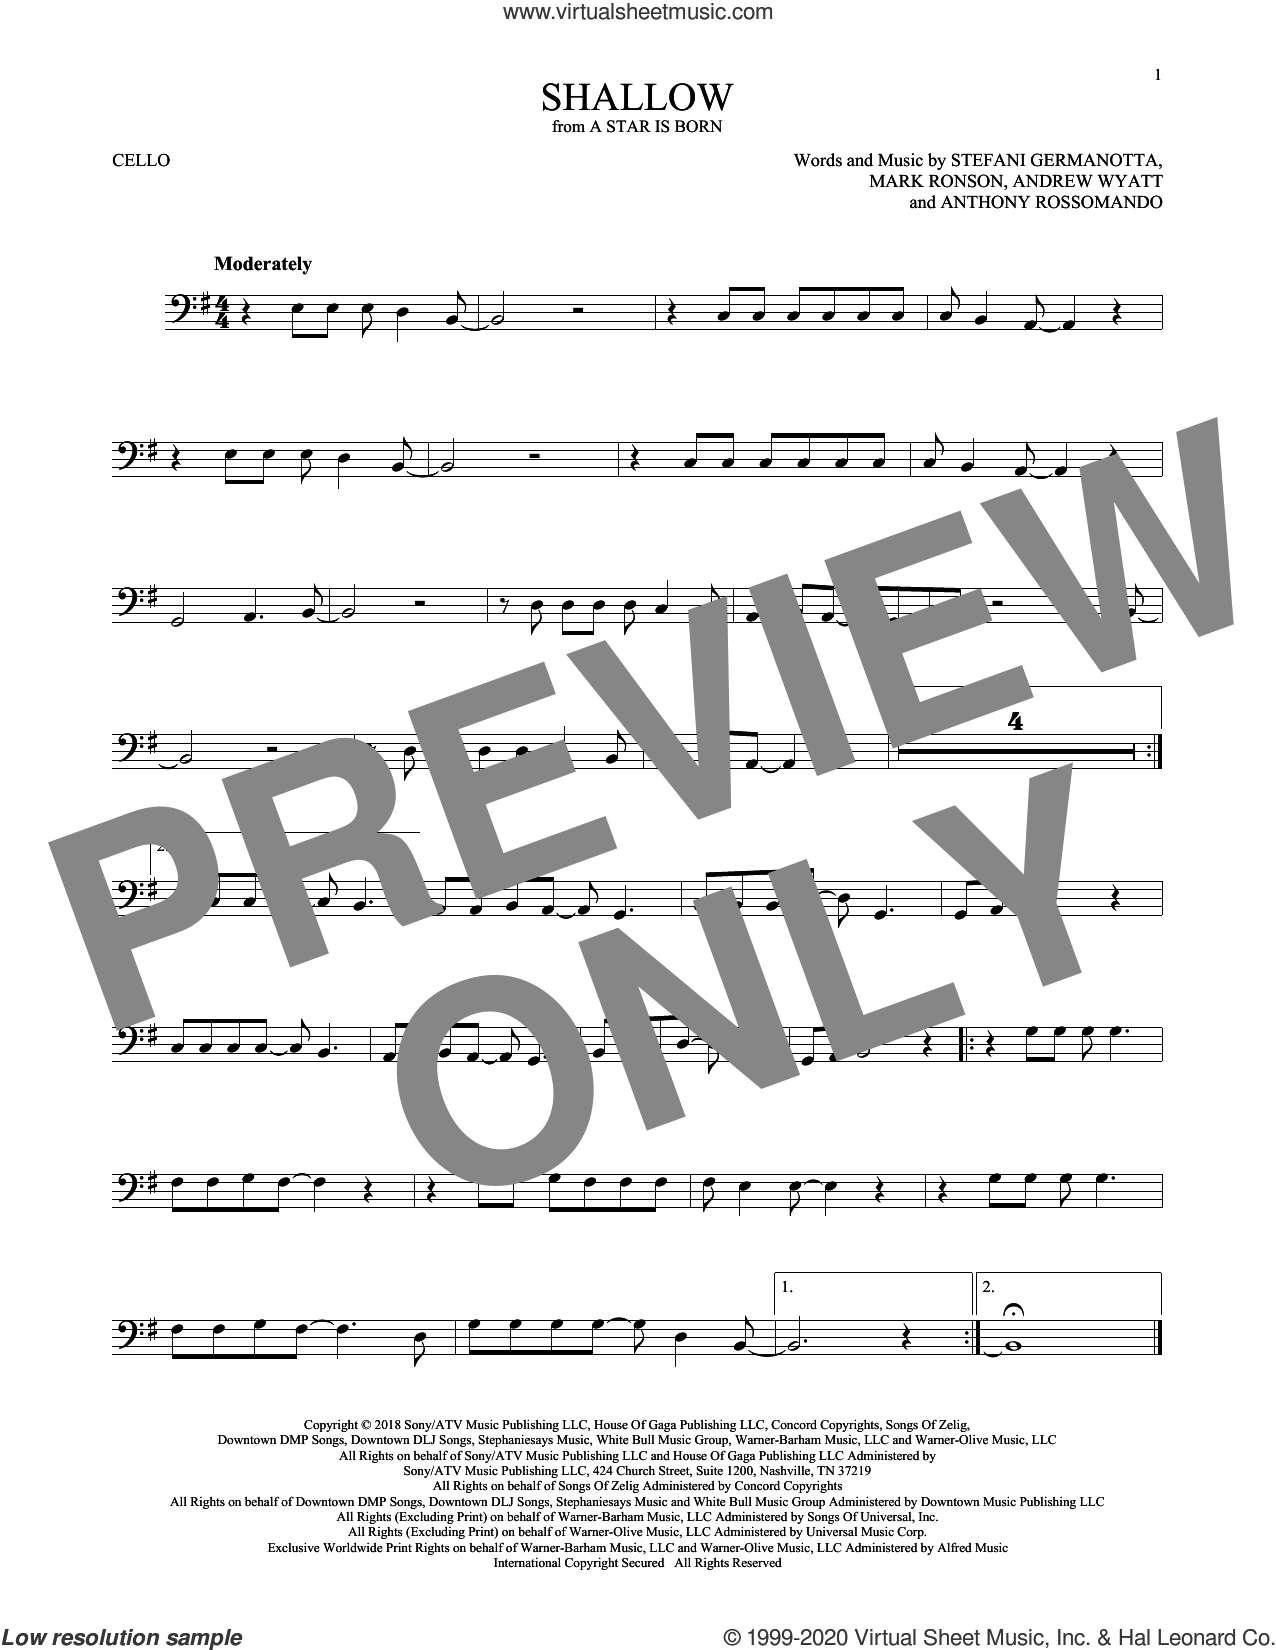 Lady Gaga: Shallow (from A Star Is Born) sheet music for cello solo